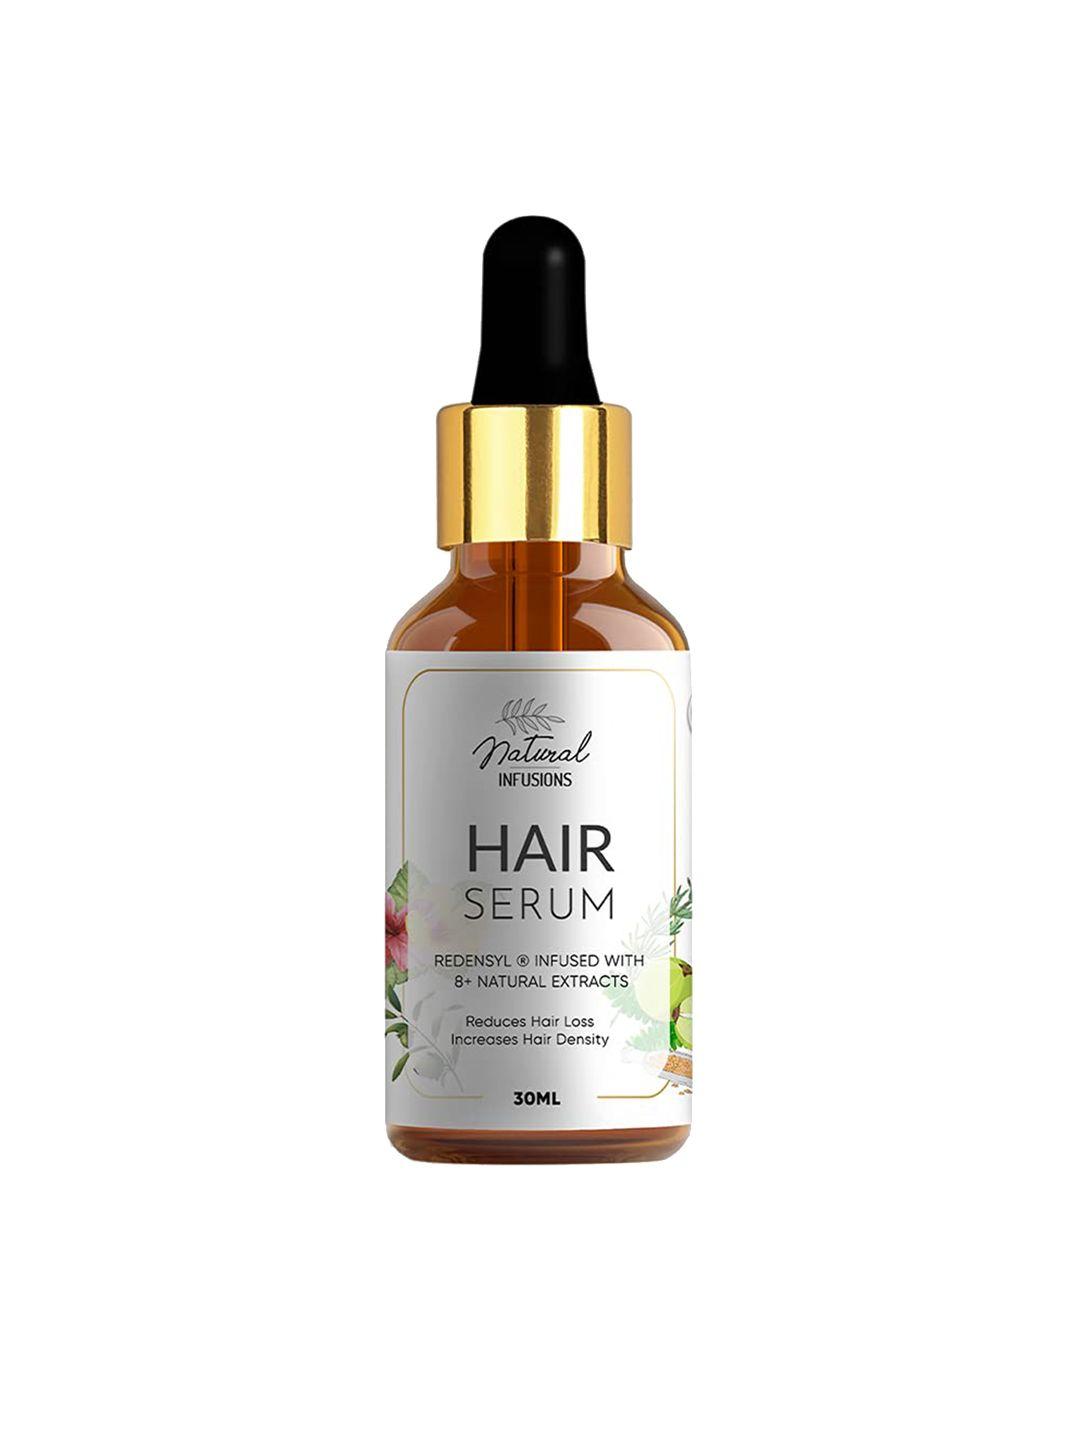 natural infusions set of 6 hair growth serum with 5% redensyl - 30ml each